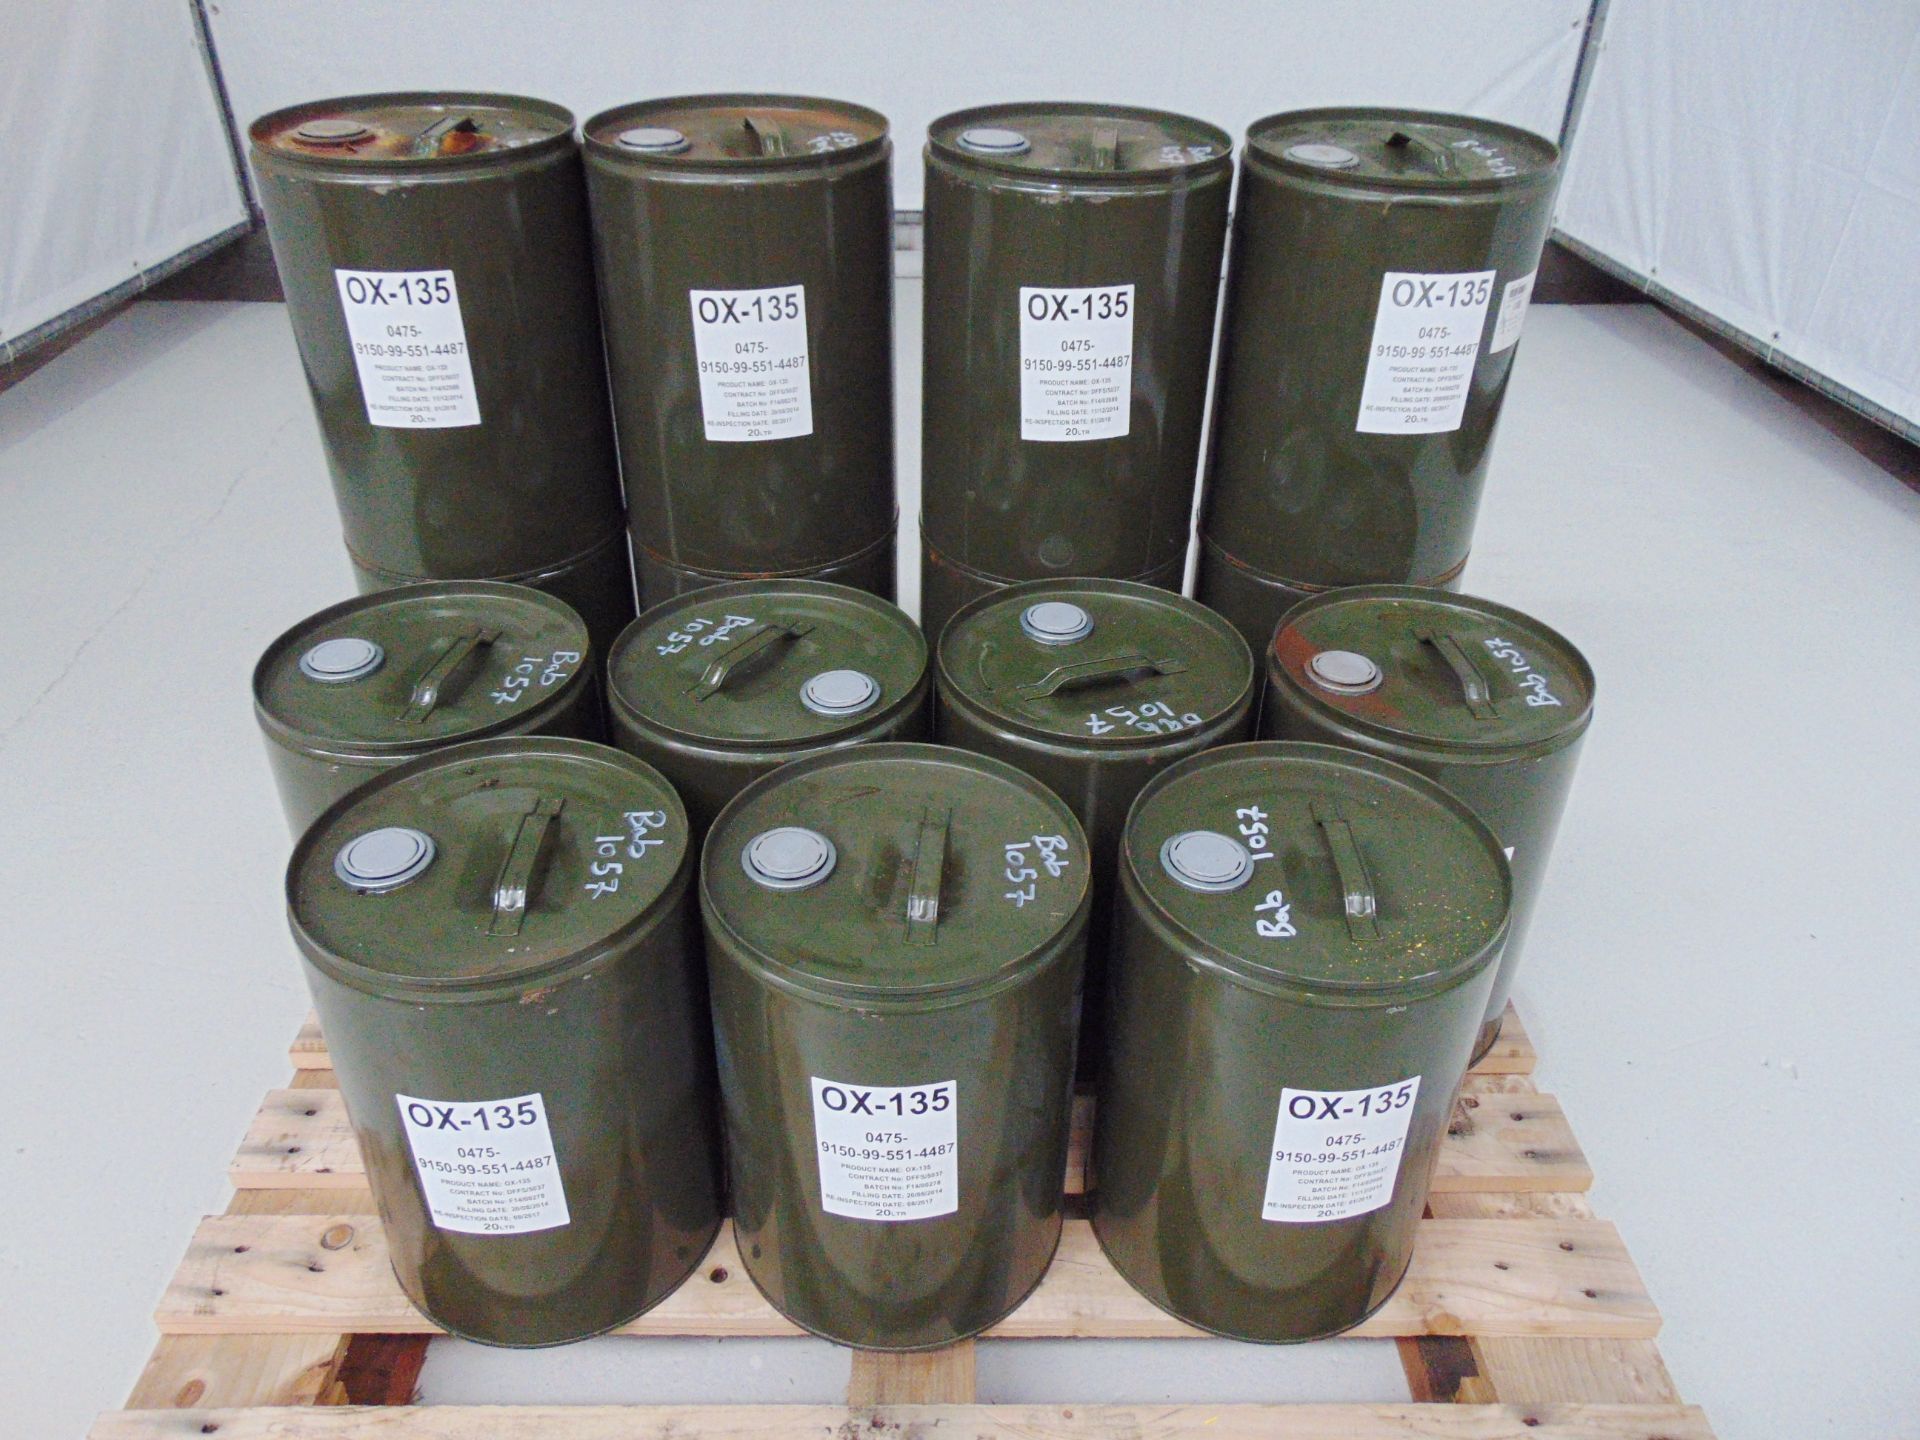 15 x Unissued 20L Cans of OX-135 Refridgerant Compressor Lubricating Oil - Image 3 of 6